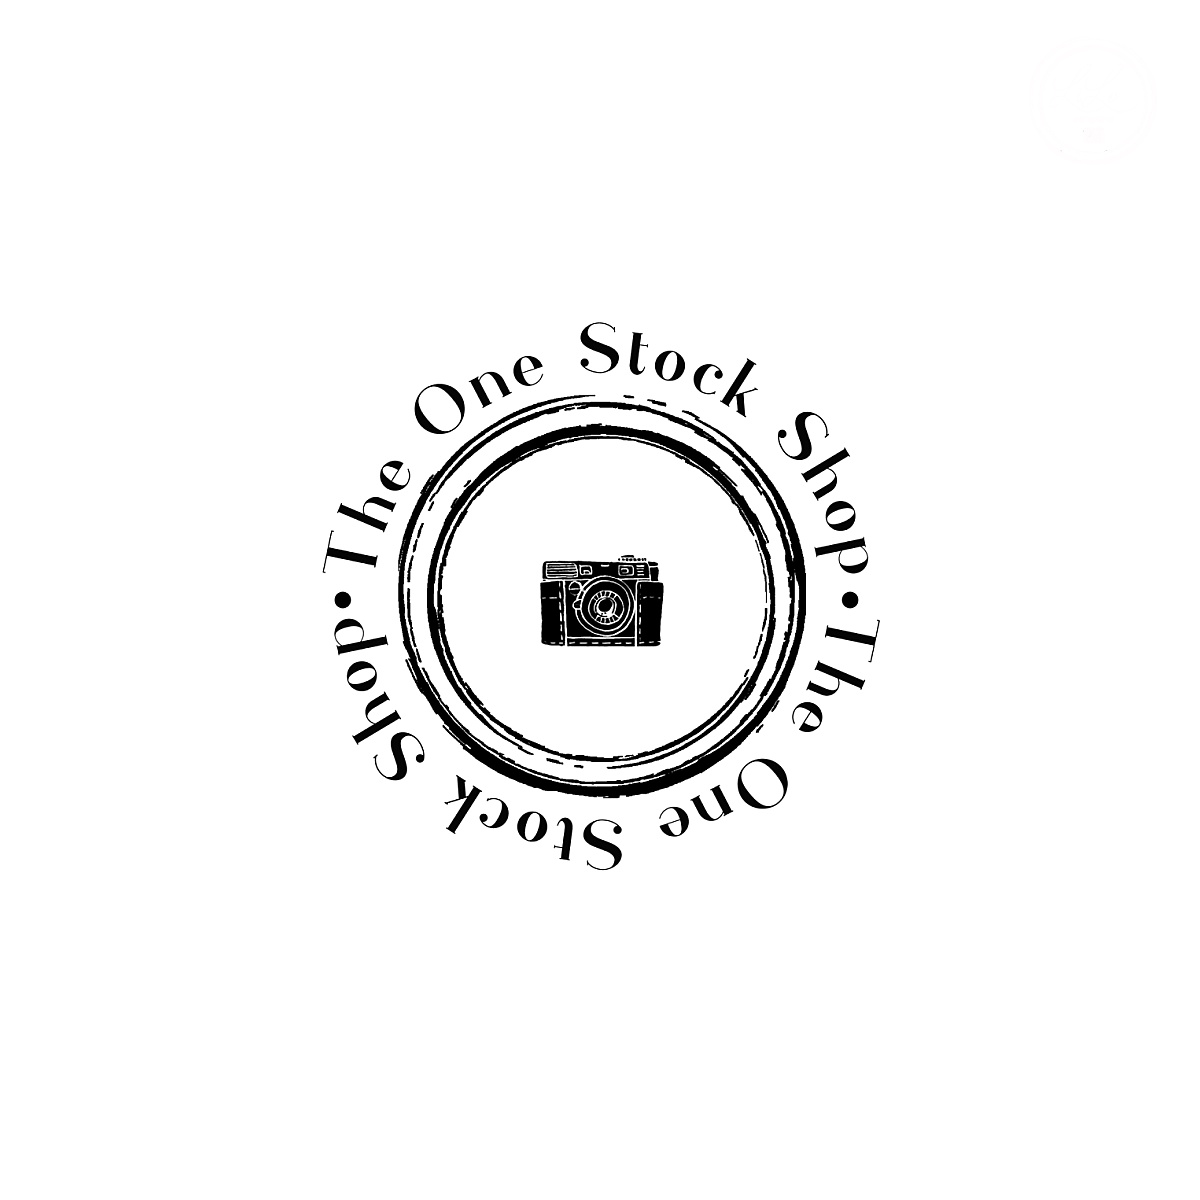 The One Stock Shop Logo